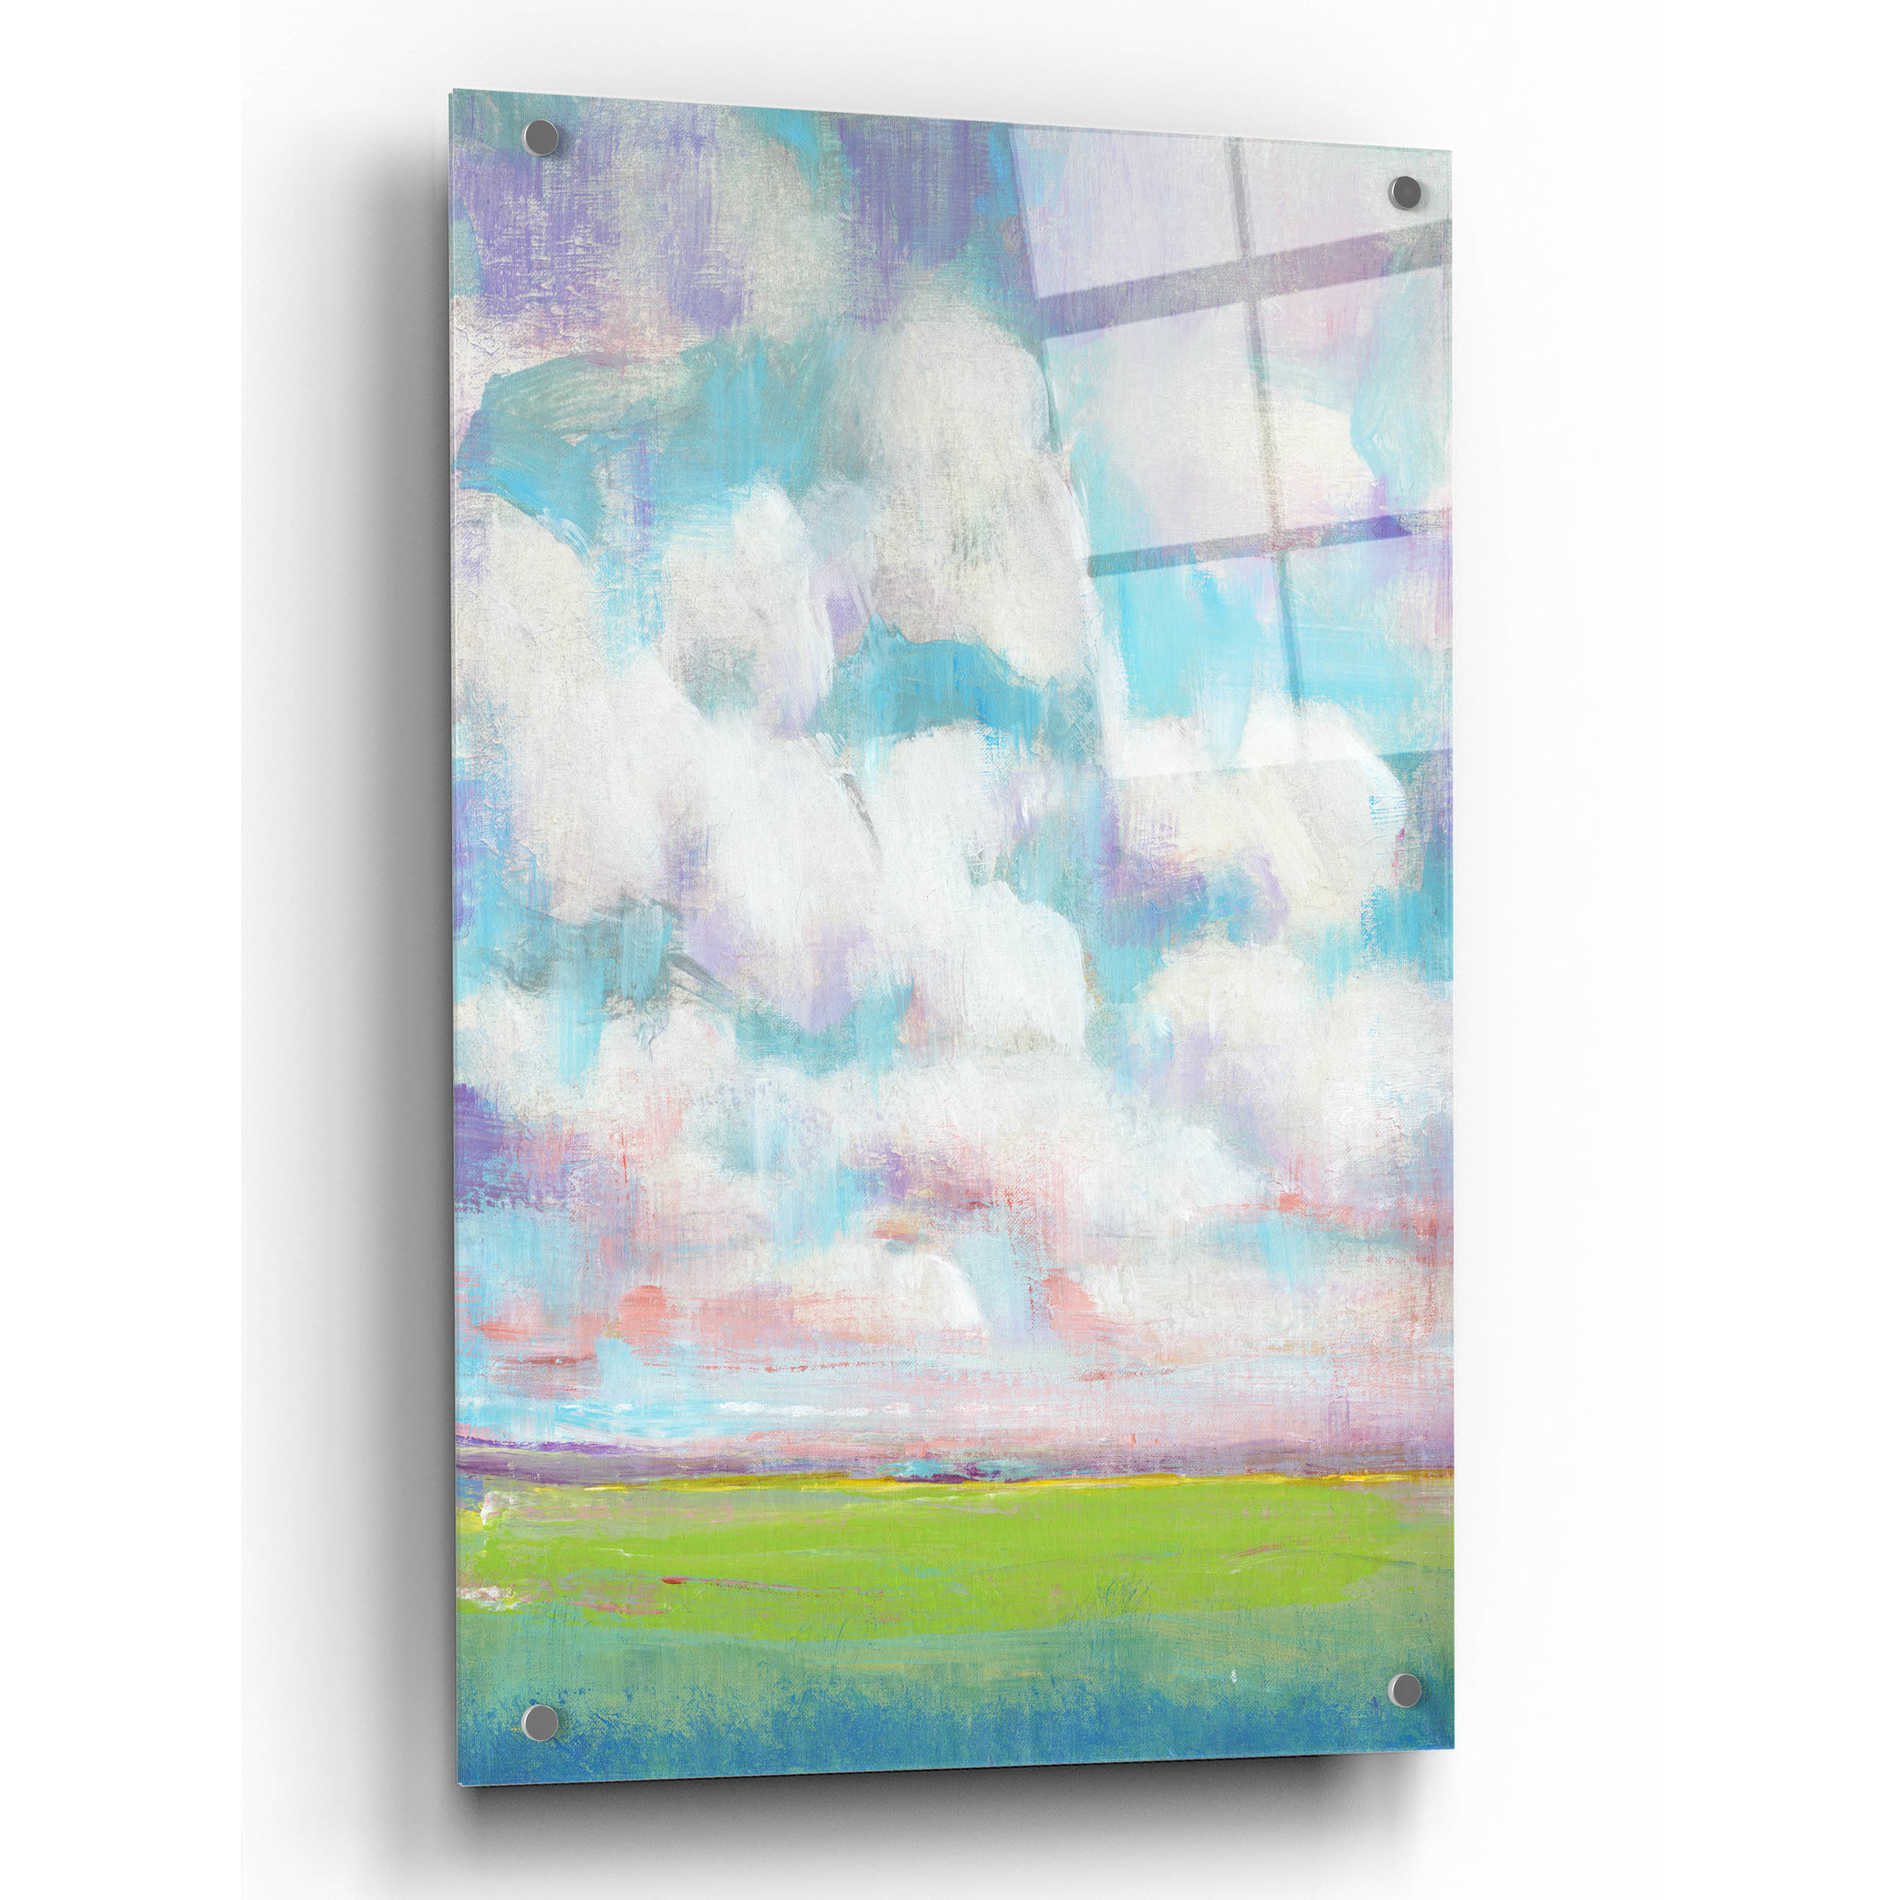 Epic Art 'Clouds in Motion II' by Tim O'Toole, Acrylic Glass Wall Art,24x36